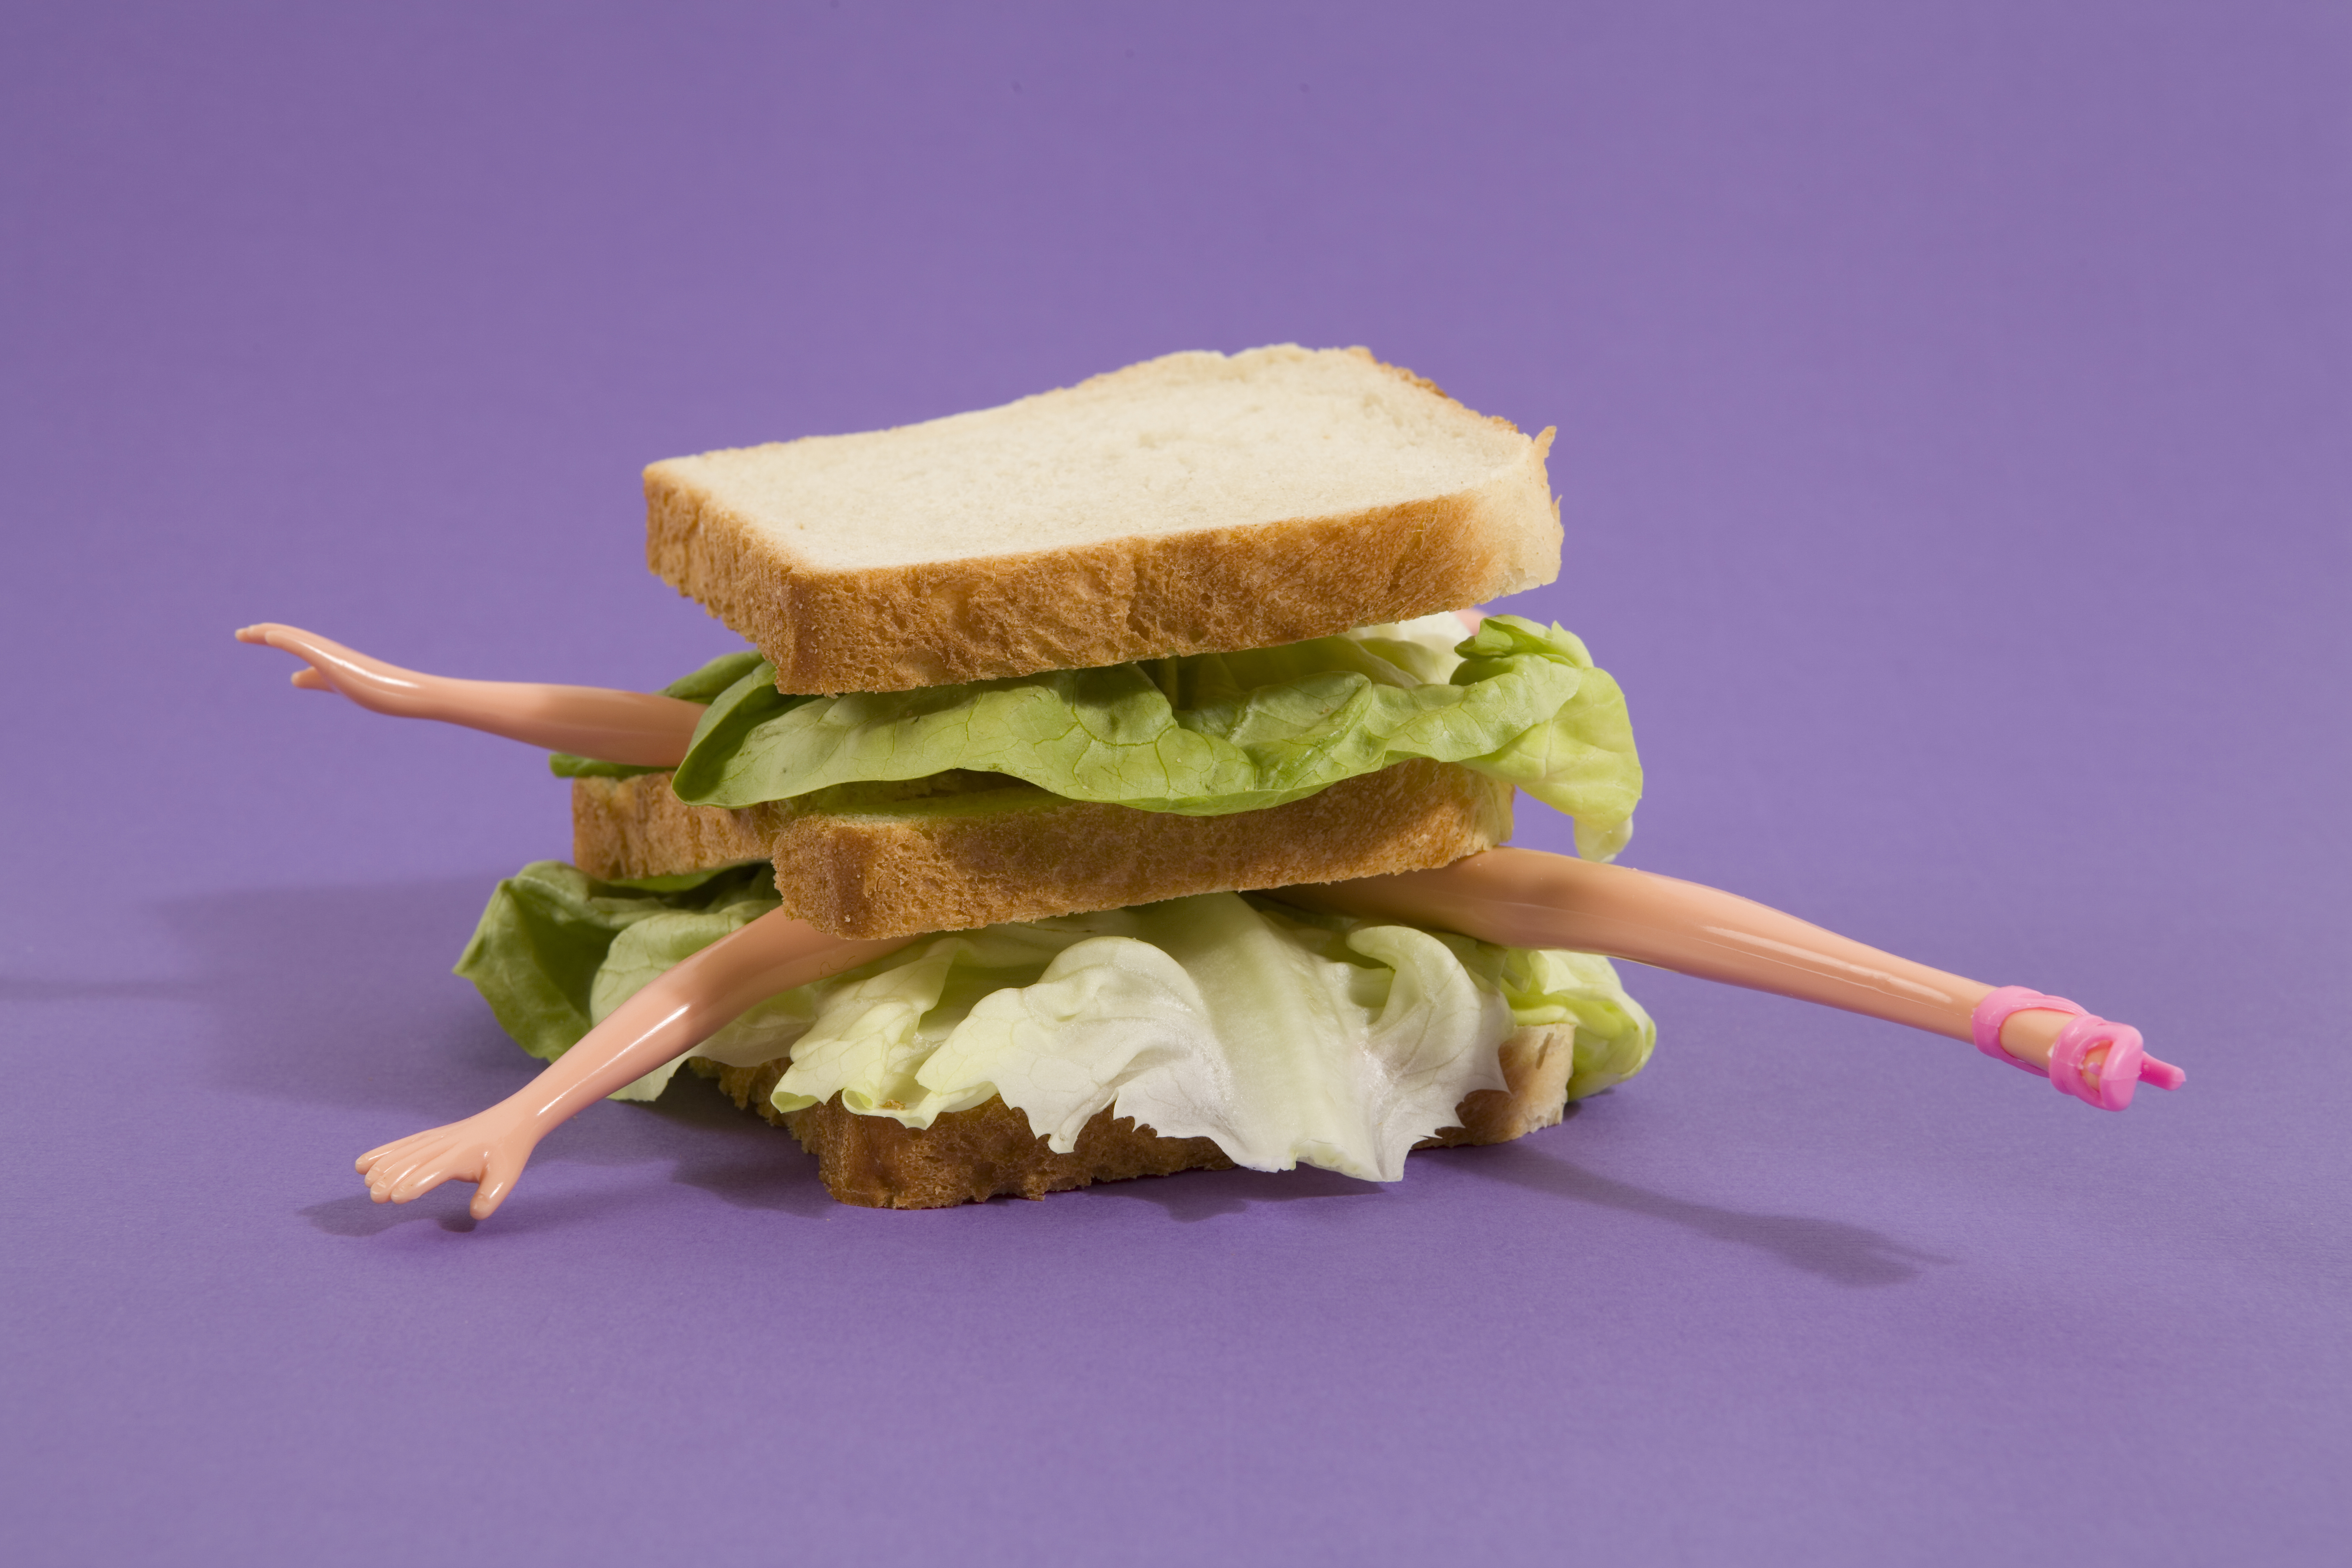 Just some doll parts and lettuce in a sandwich, NBD